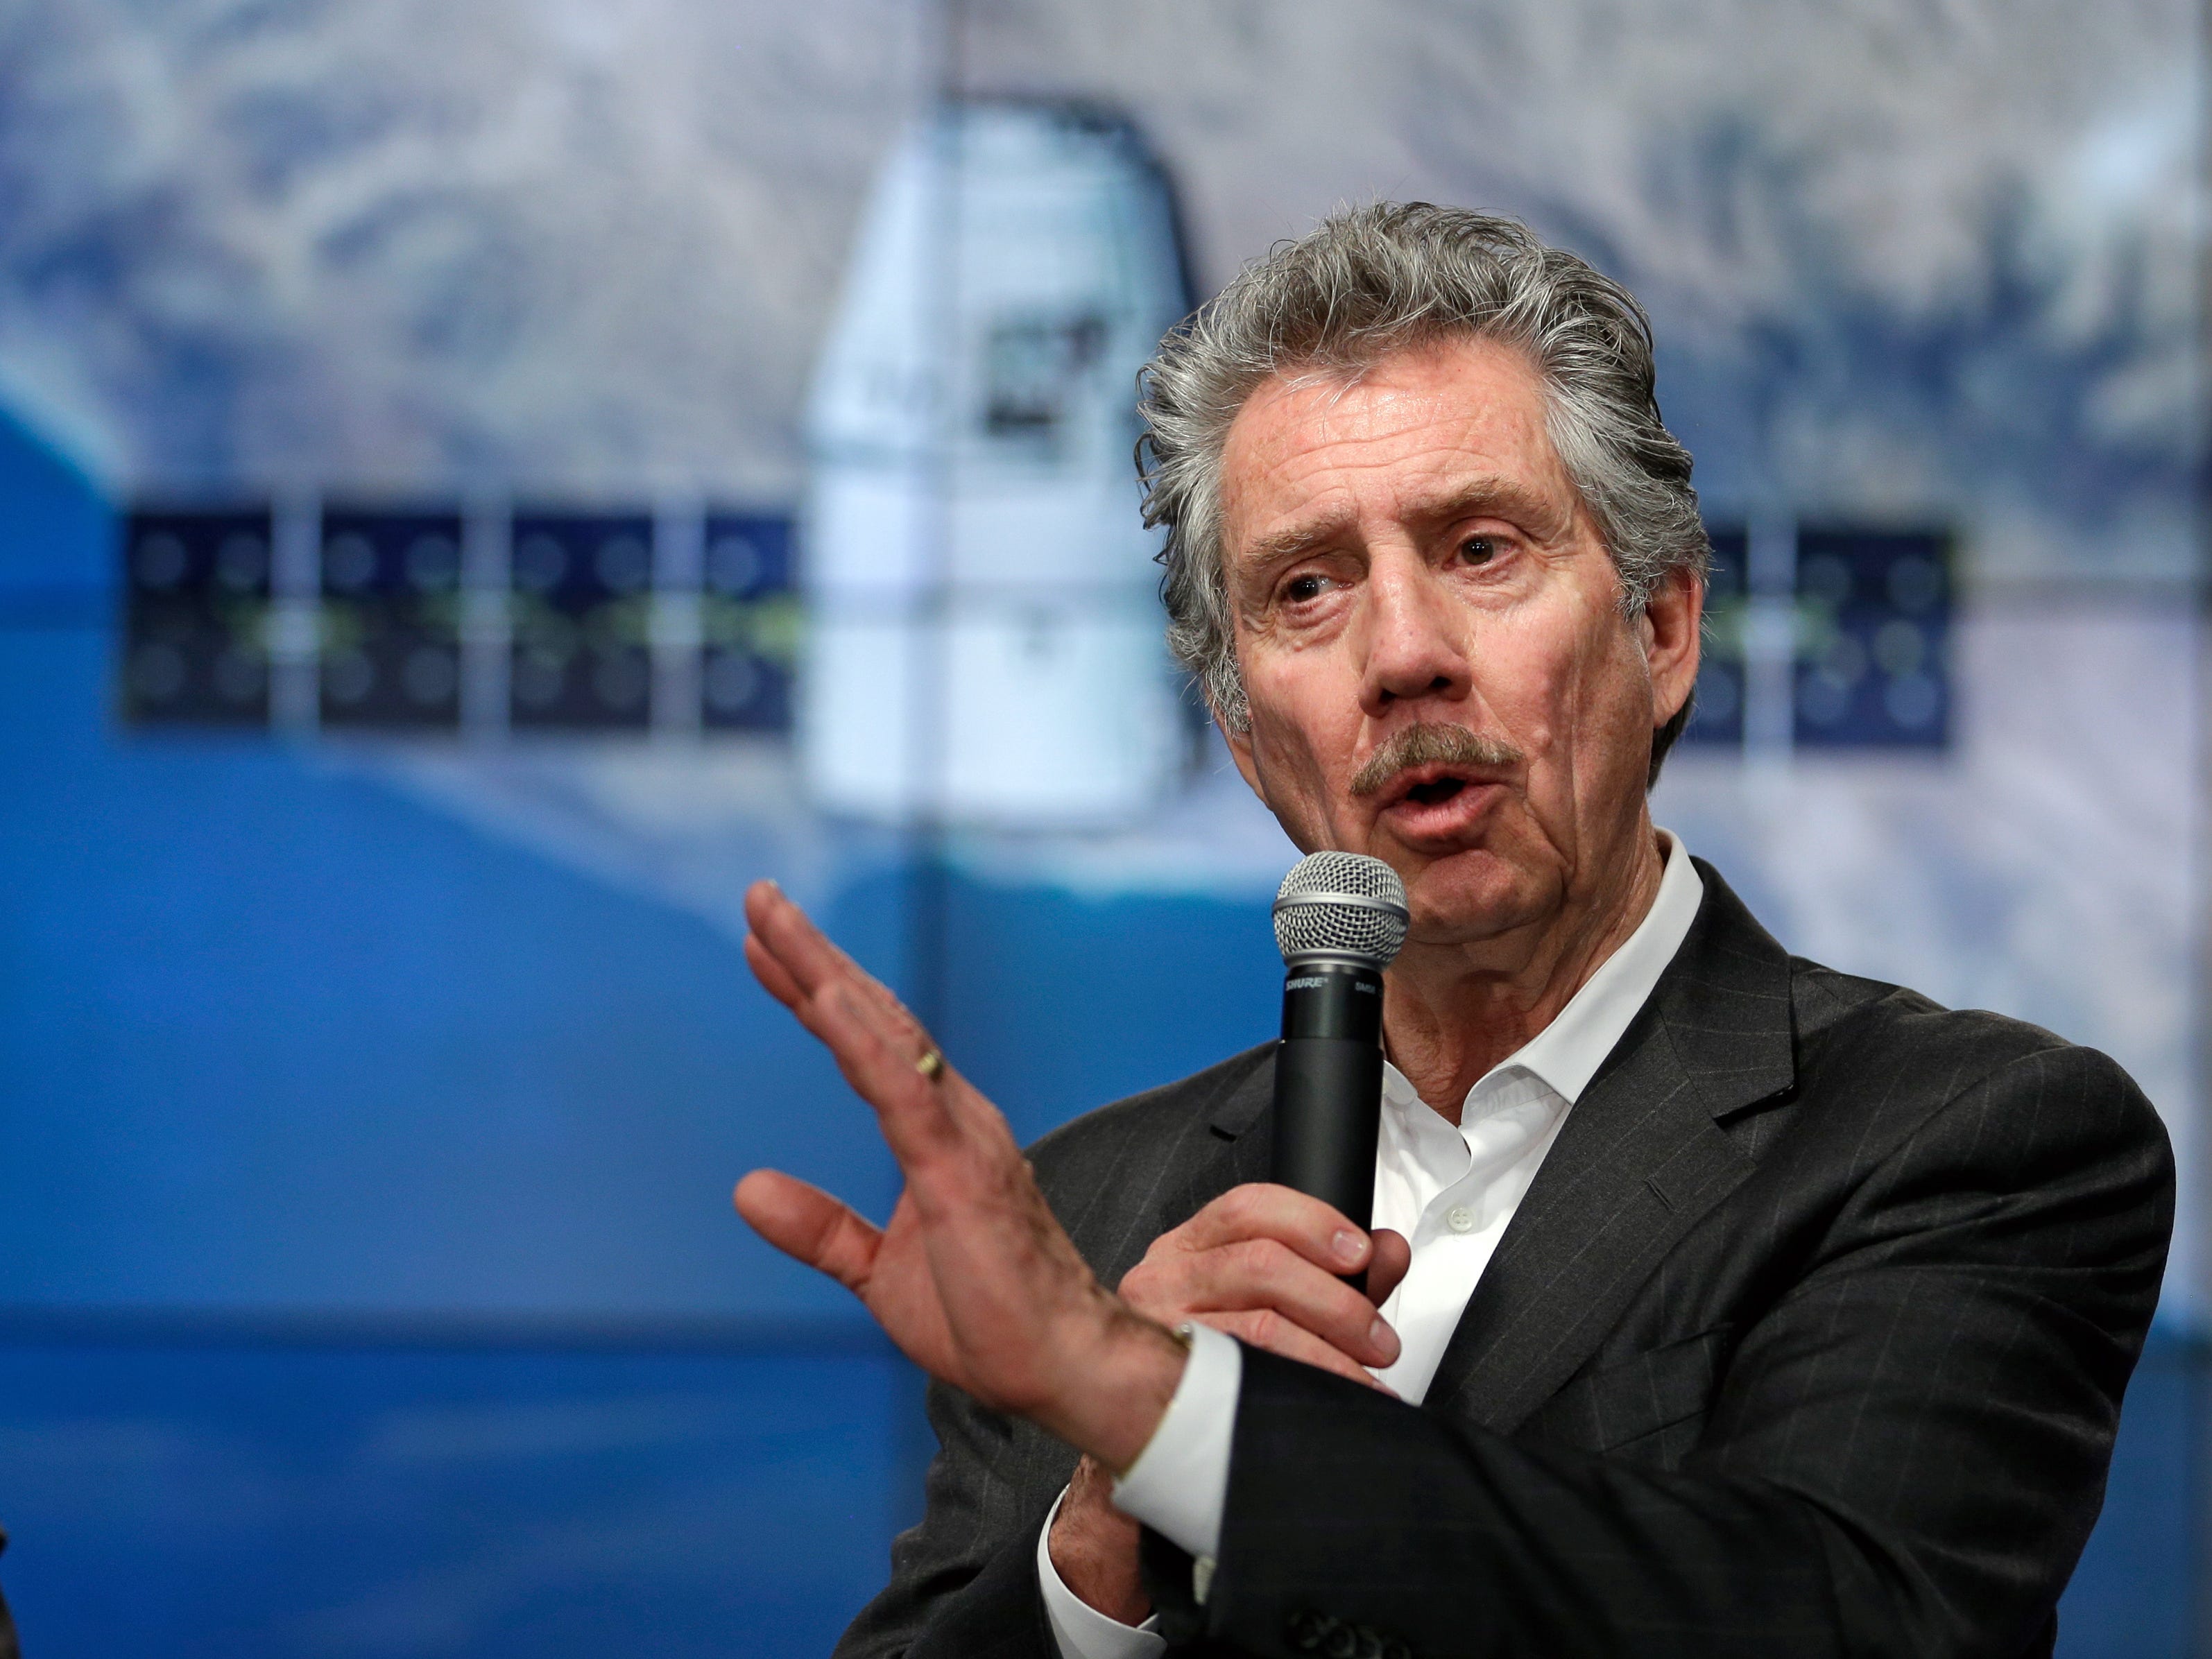 <p>Robert Bigelow, the hotel chain mogul who <a href="https://www.businessinsider.com/robert-bigelow-space-station-operations-company-2018-2">launched a spaceflight company</a> in 2018, was originally a <a href="https://www.businessinsider.com/ufo-vegas-hotel-mogul-funnels-cash-to-desantis-2023-4">major DeSantis donor</a> this cycle.</p><p><span>"I will give him more money and go without food," Bigelow told TIME after pouring more than $20 million into the Florida governor's "Never Back Down" super PAC in March 2023.</span></p><p><span>He has since pivoted, donating more than $10 million to Trump-aligned PACs since February 2024.</span></p><p><span>Bigelow also </span><a href="https://www.reuters.com/world/us/donor-bigelow-gave-trump-1-mln-legal-fees-donate-20-million-more-2024-01-30/"><span>told Reuters</span></a><span> in January that he would be contributing $1 million to pay Trump's mounting legal fees as well.</span></p><p><span>"I was just sympathetic. They didn't solicit anything from me," Bigelow told the outlet.</span></p>